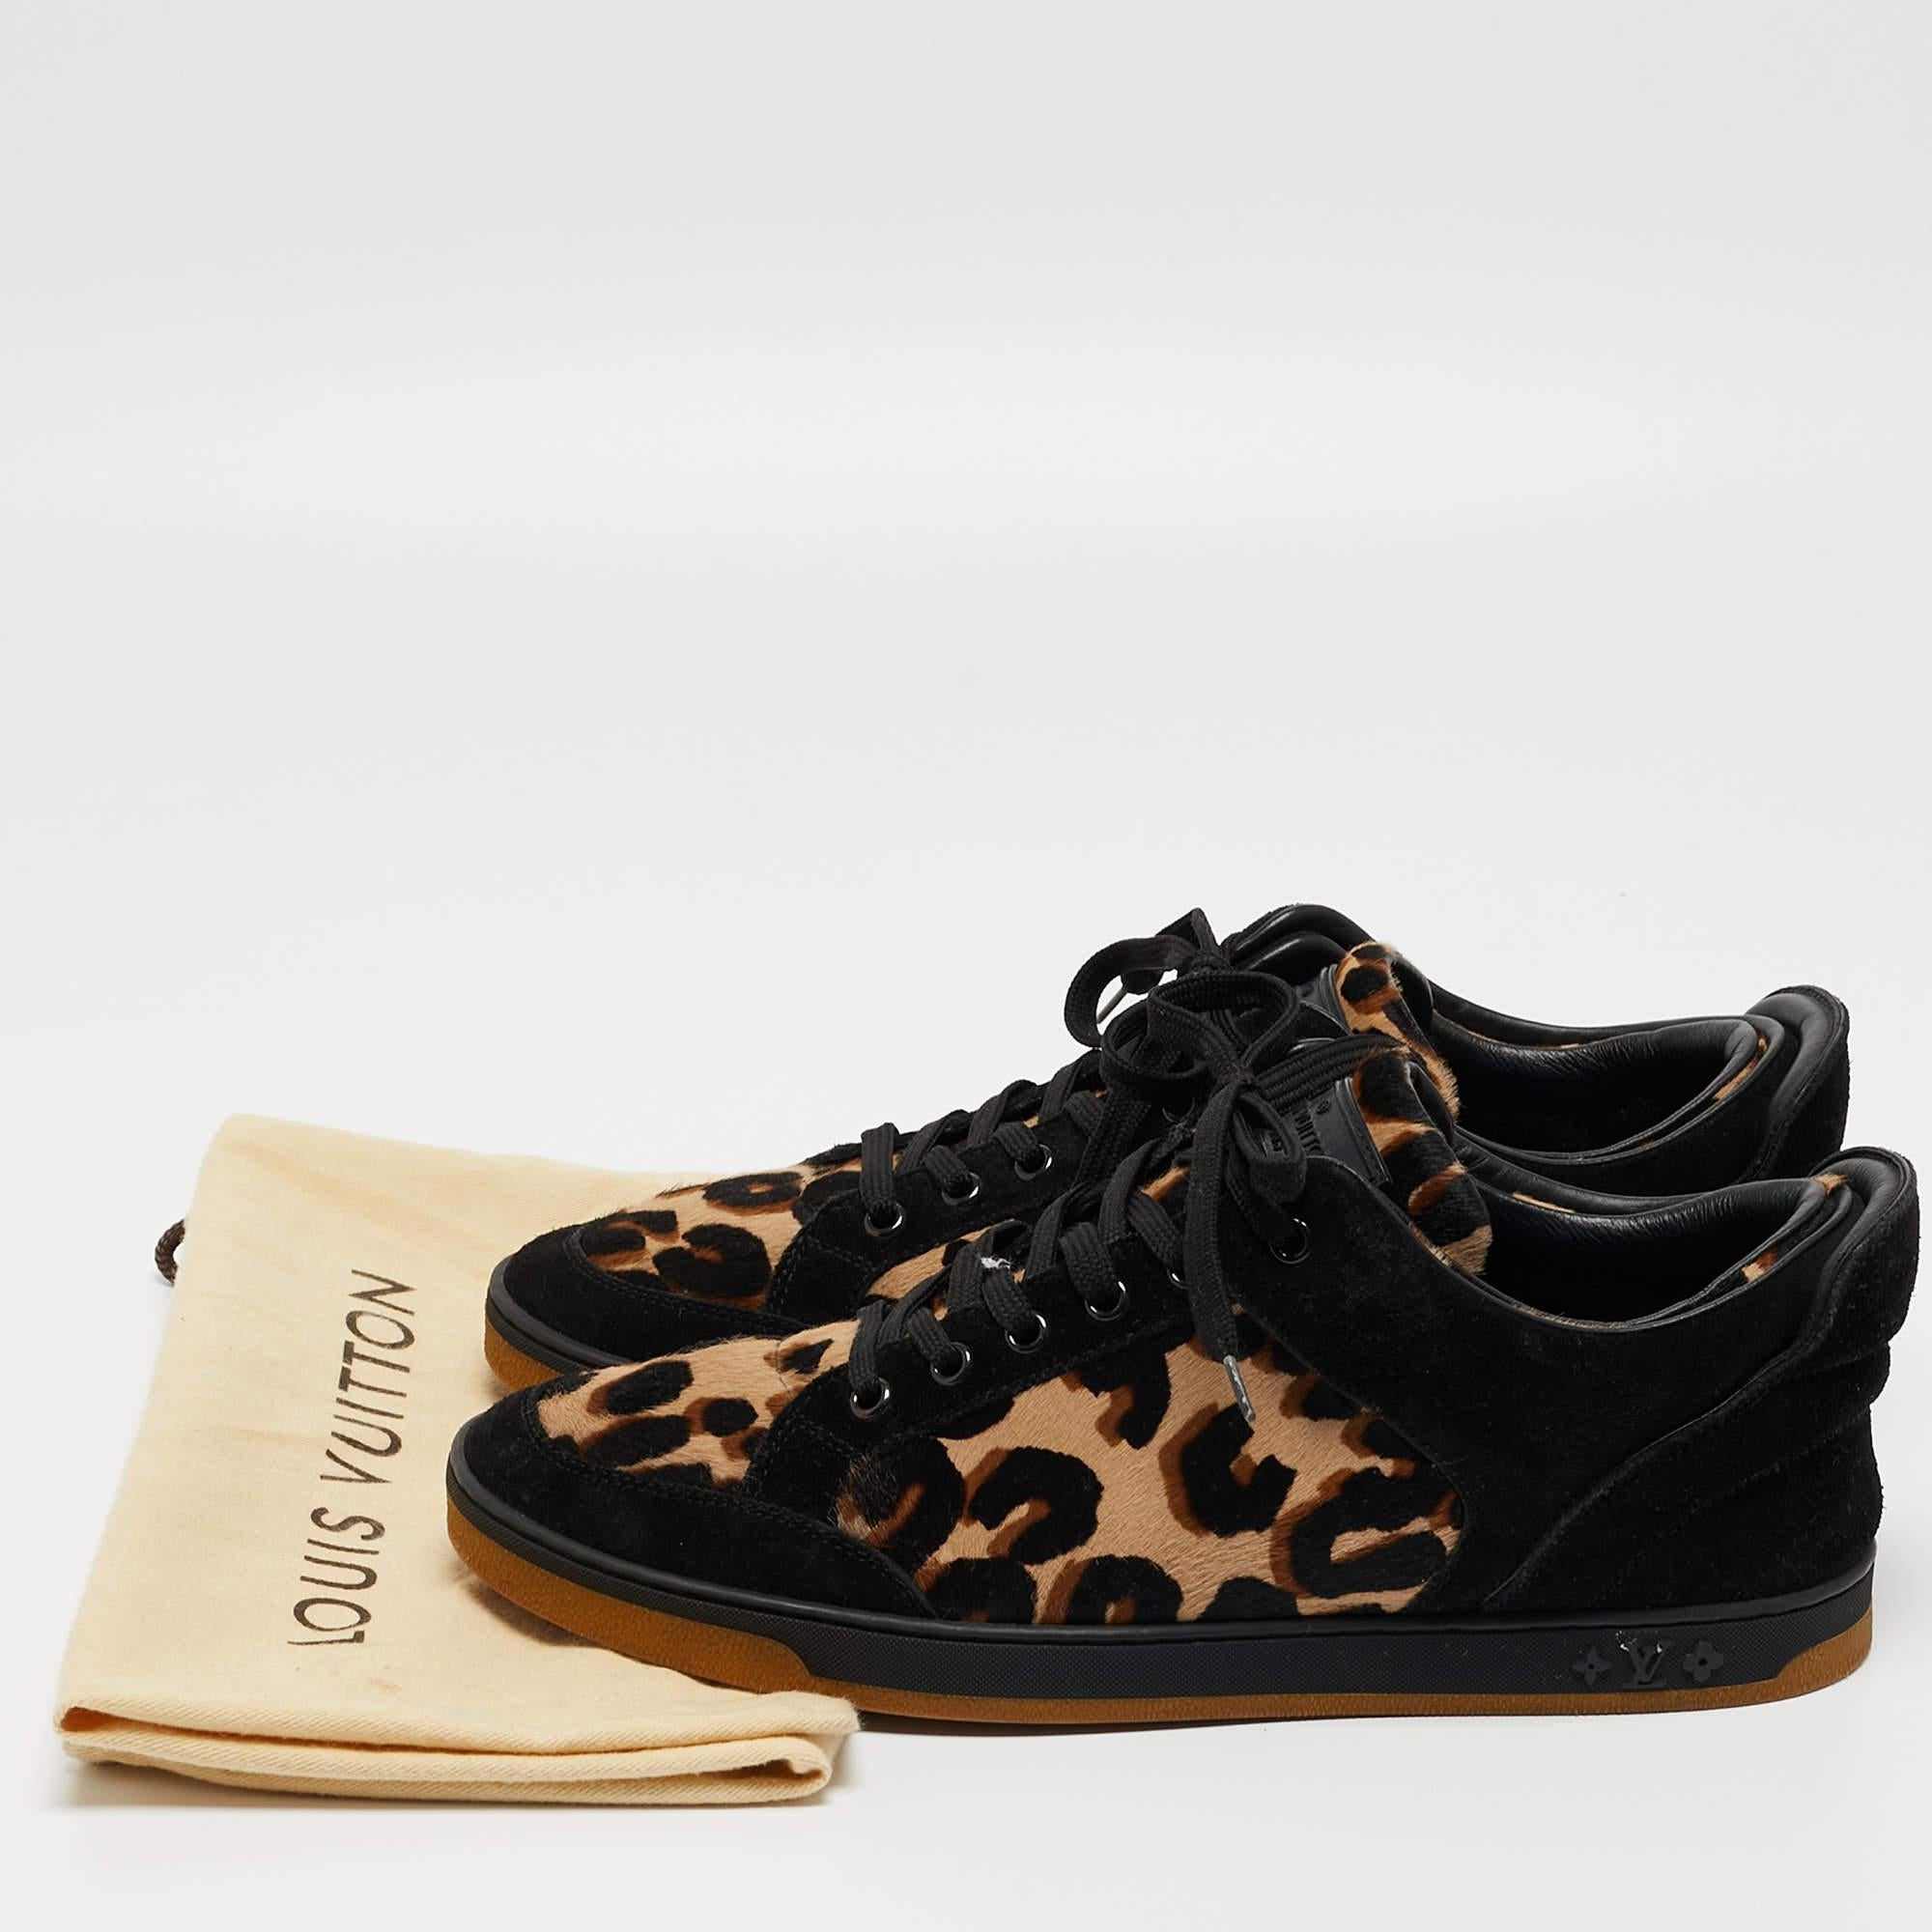 Louis Vuitton Black/Brown Calf Hair and Suede Low Top Sneakers Size 38.5 For Sale 4